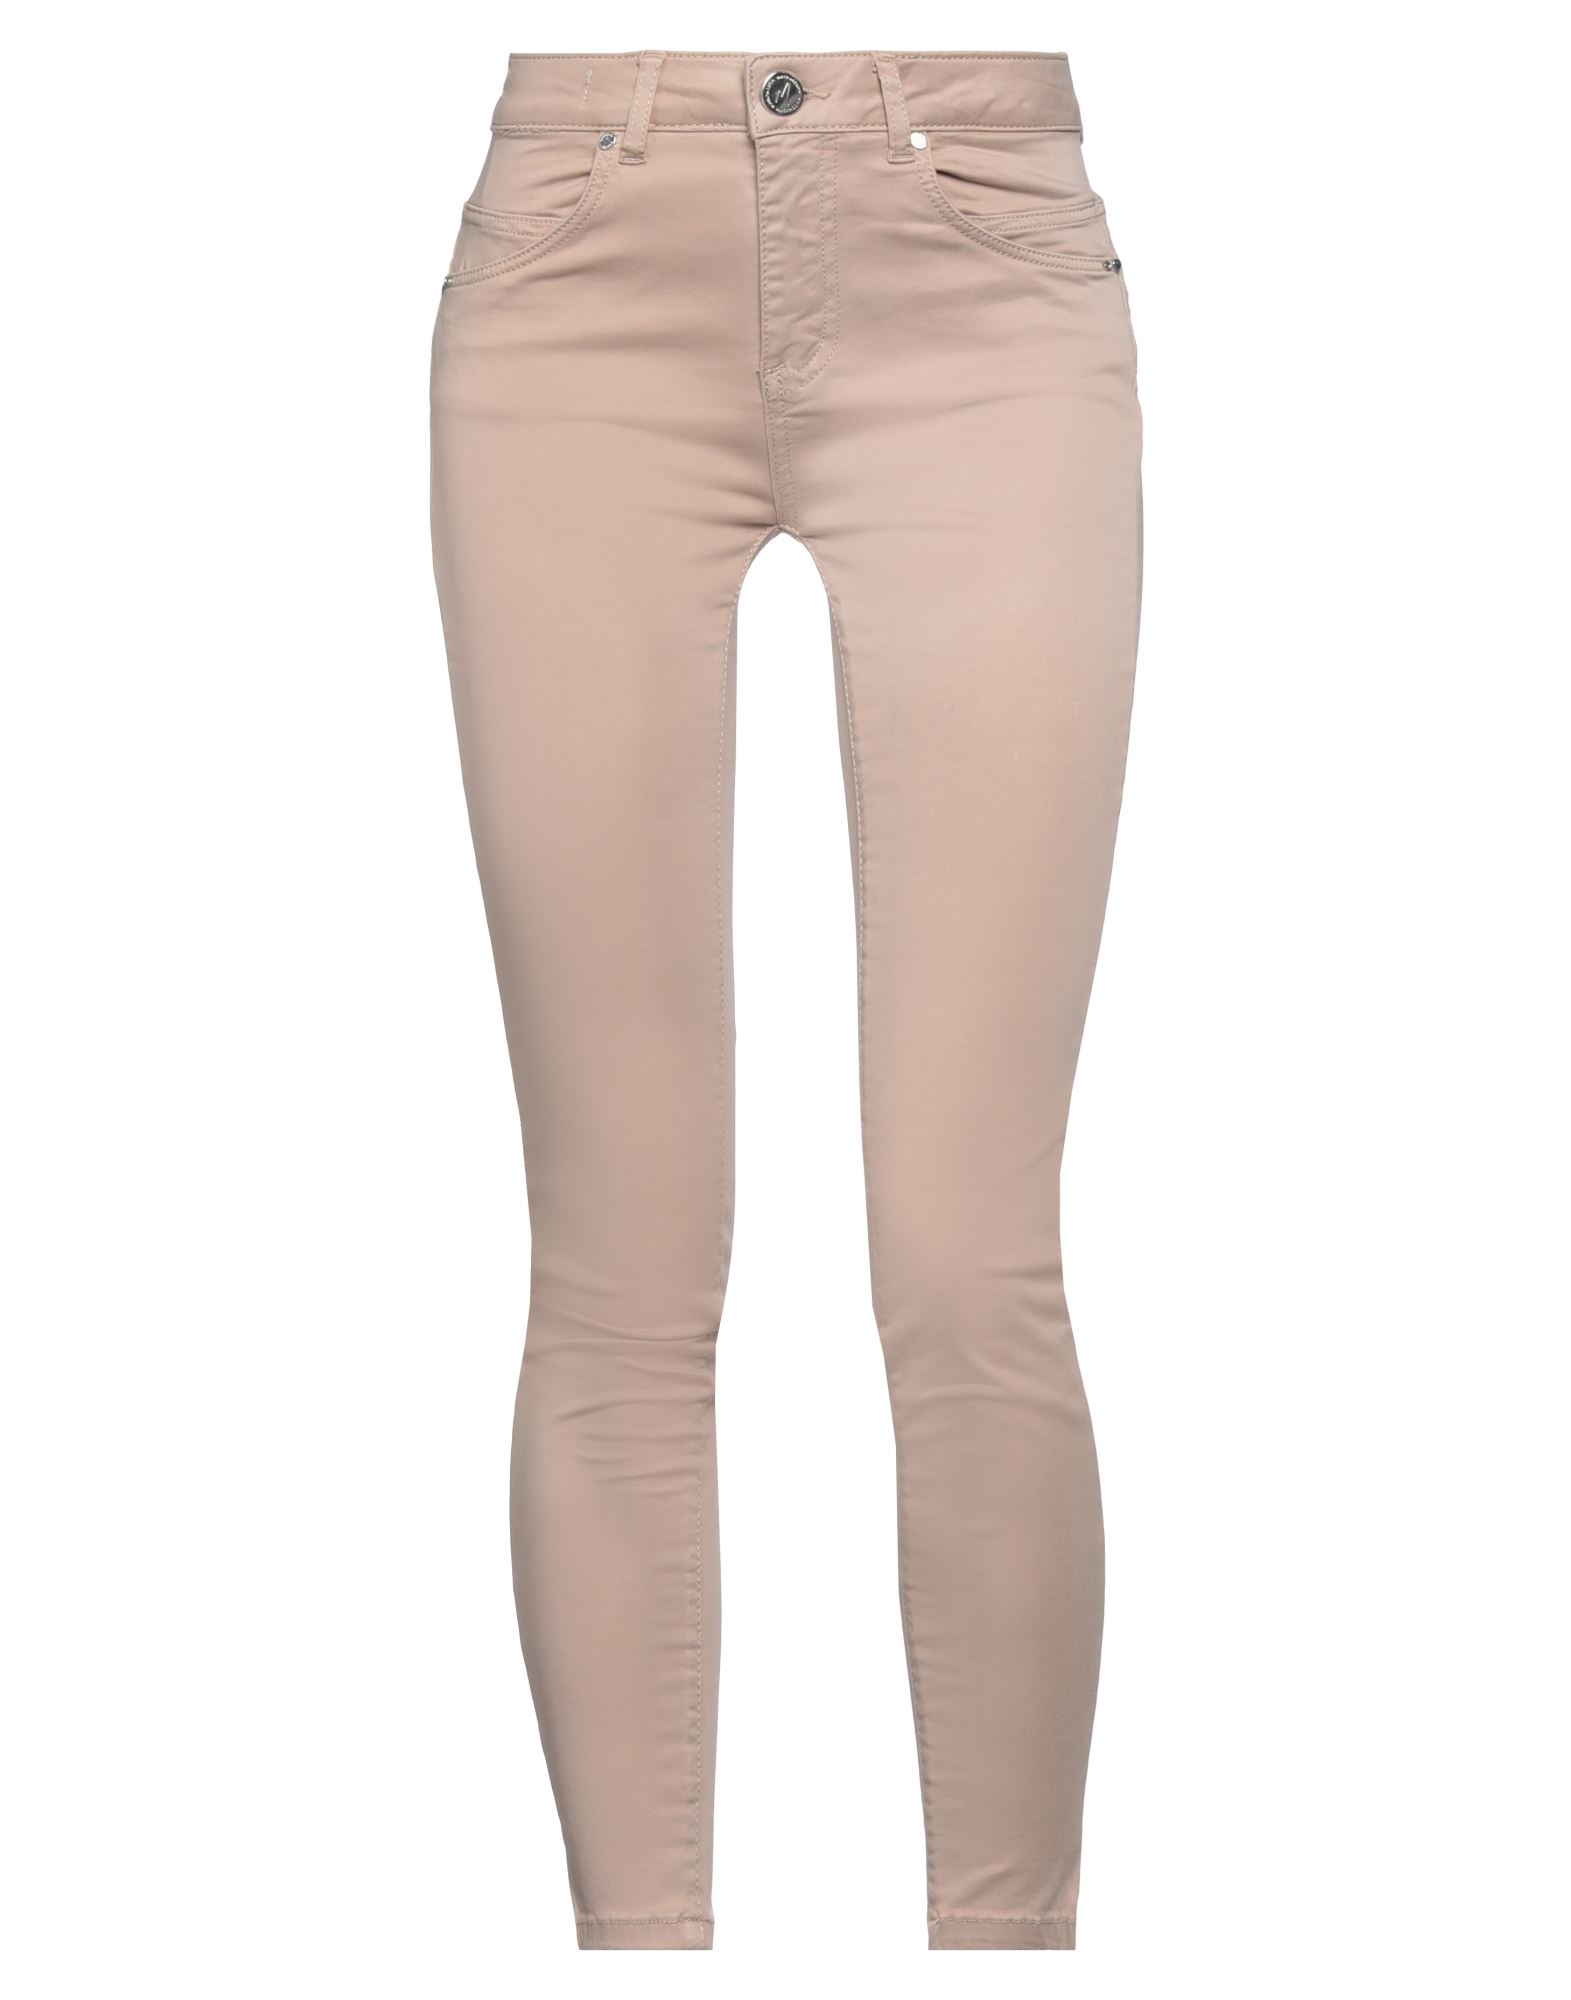 Maison Espin Pants In Light Brown